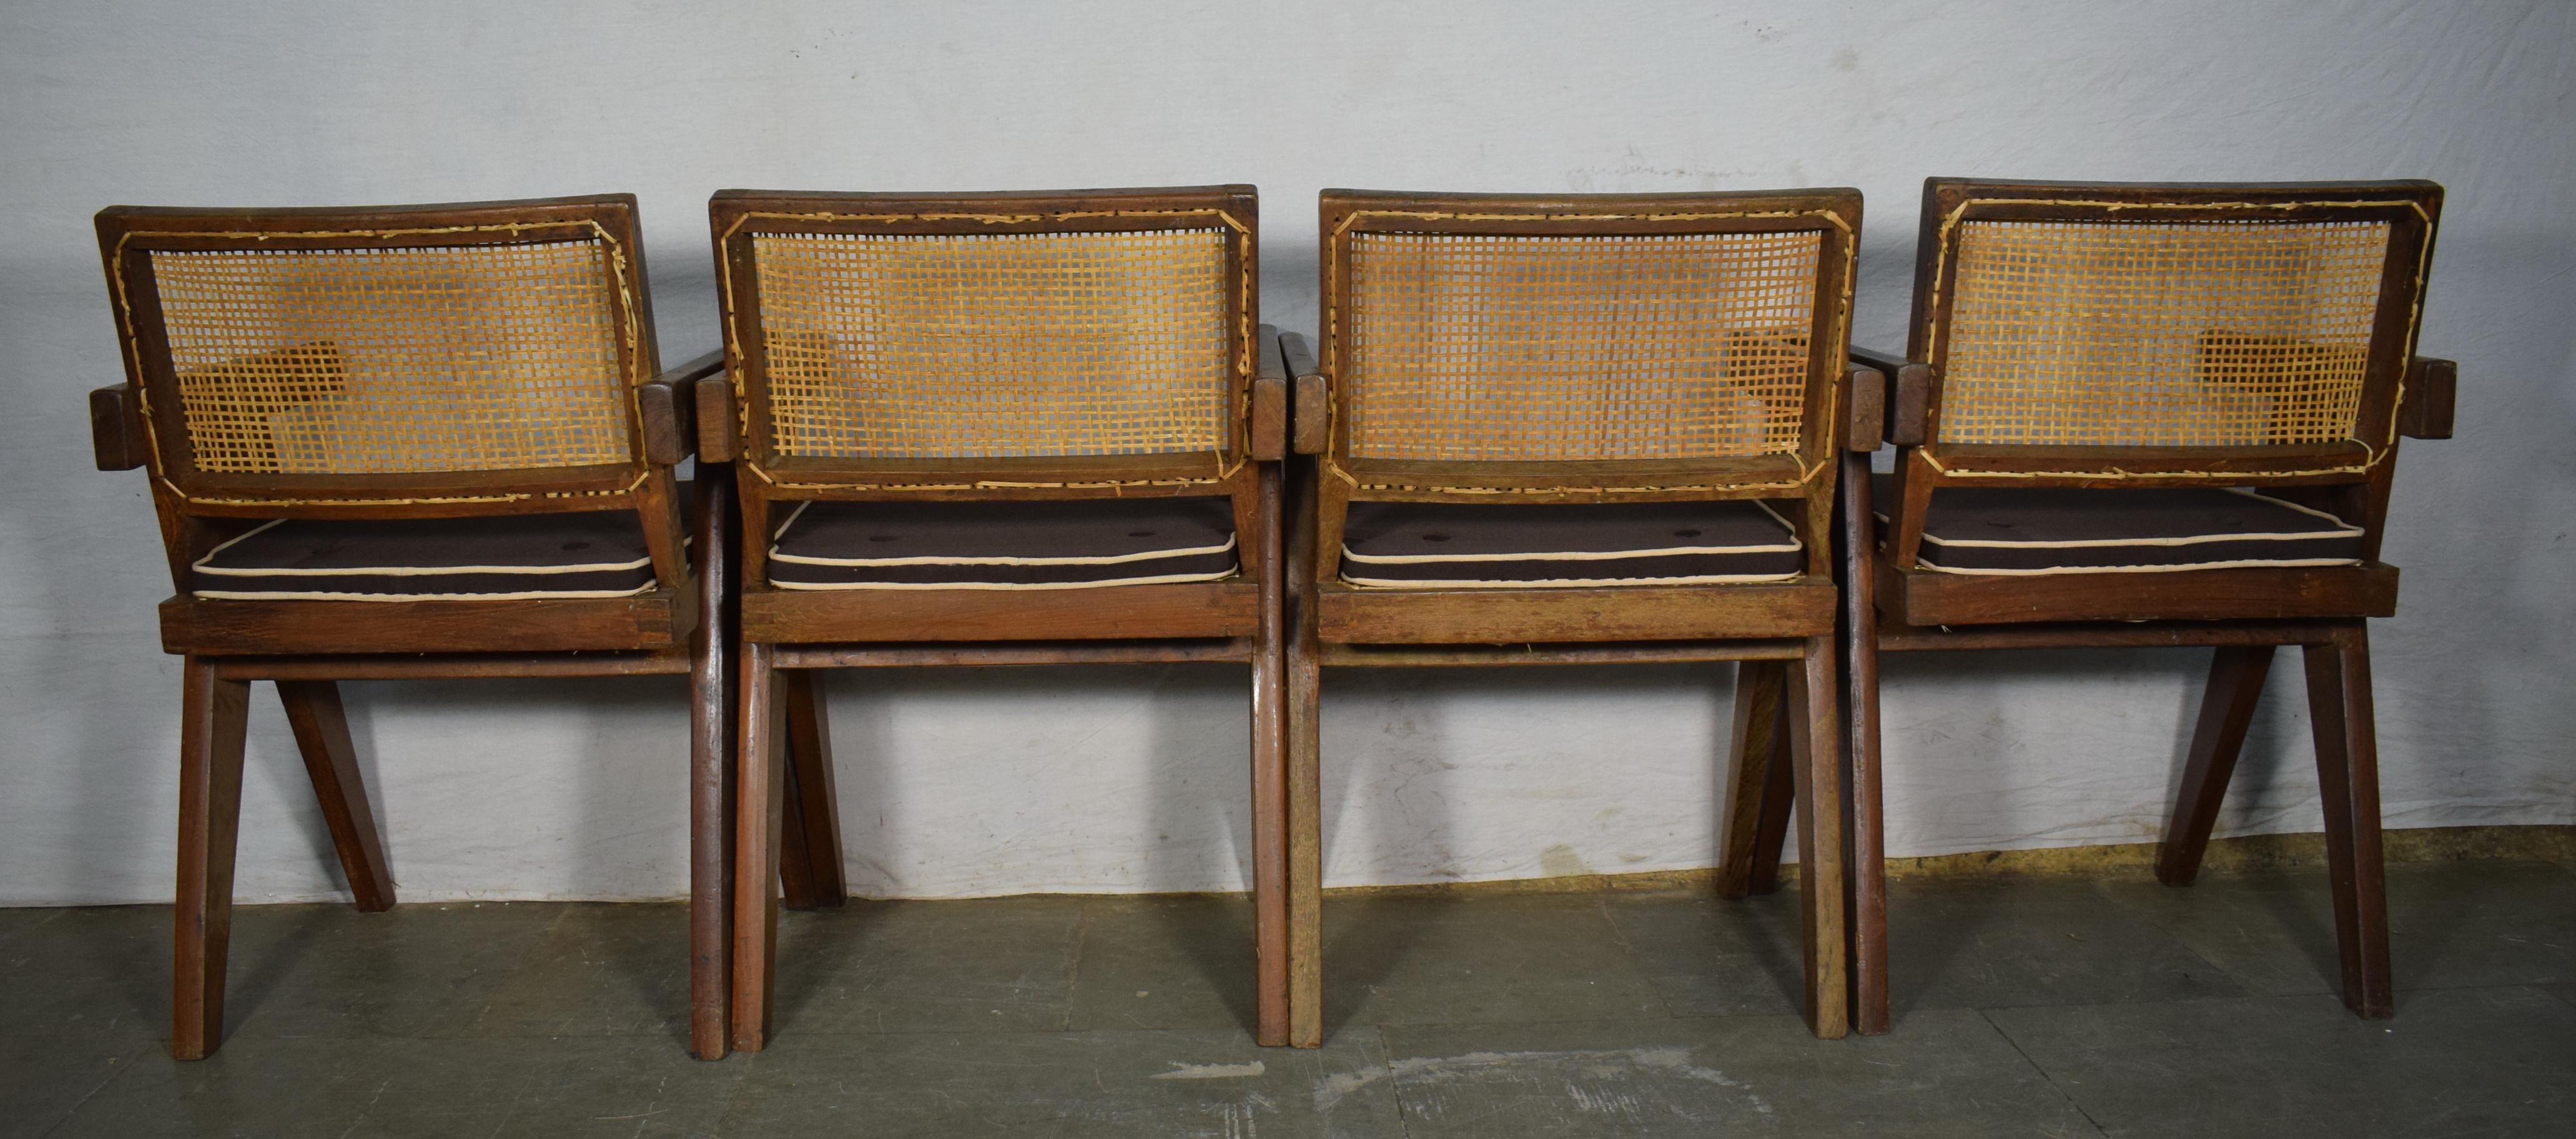 Indian Pierre Jeanneret Set of 4 Chairs / Authentic Mid-Century Modern PJ-SI-28-B